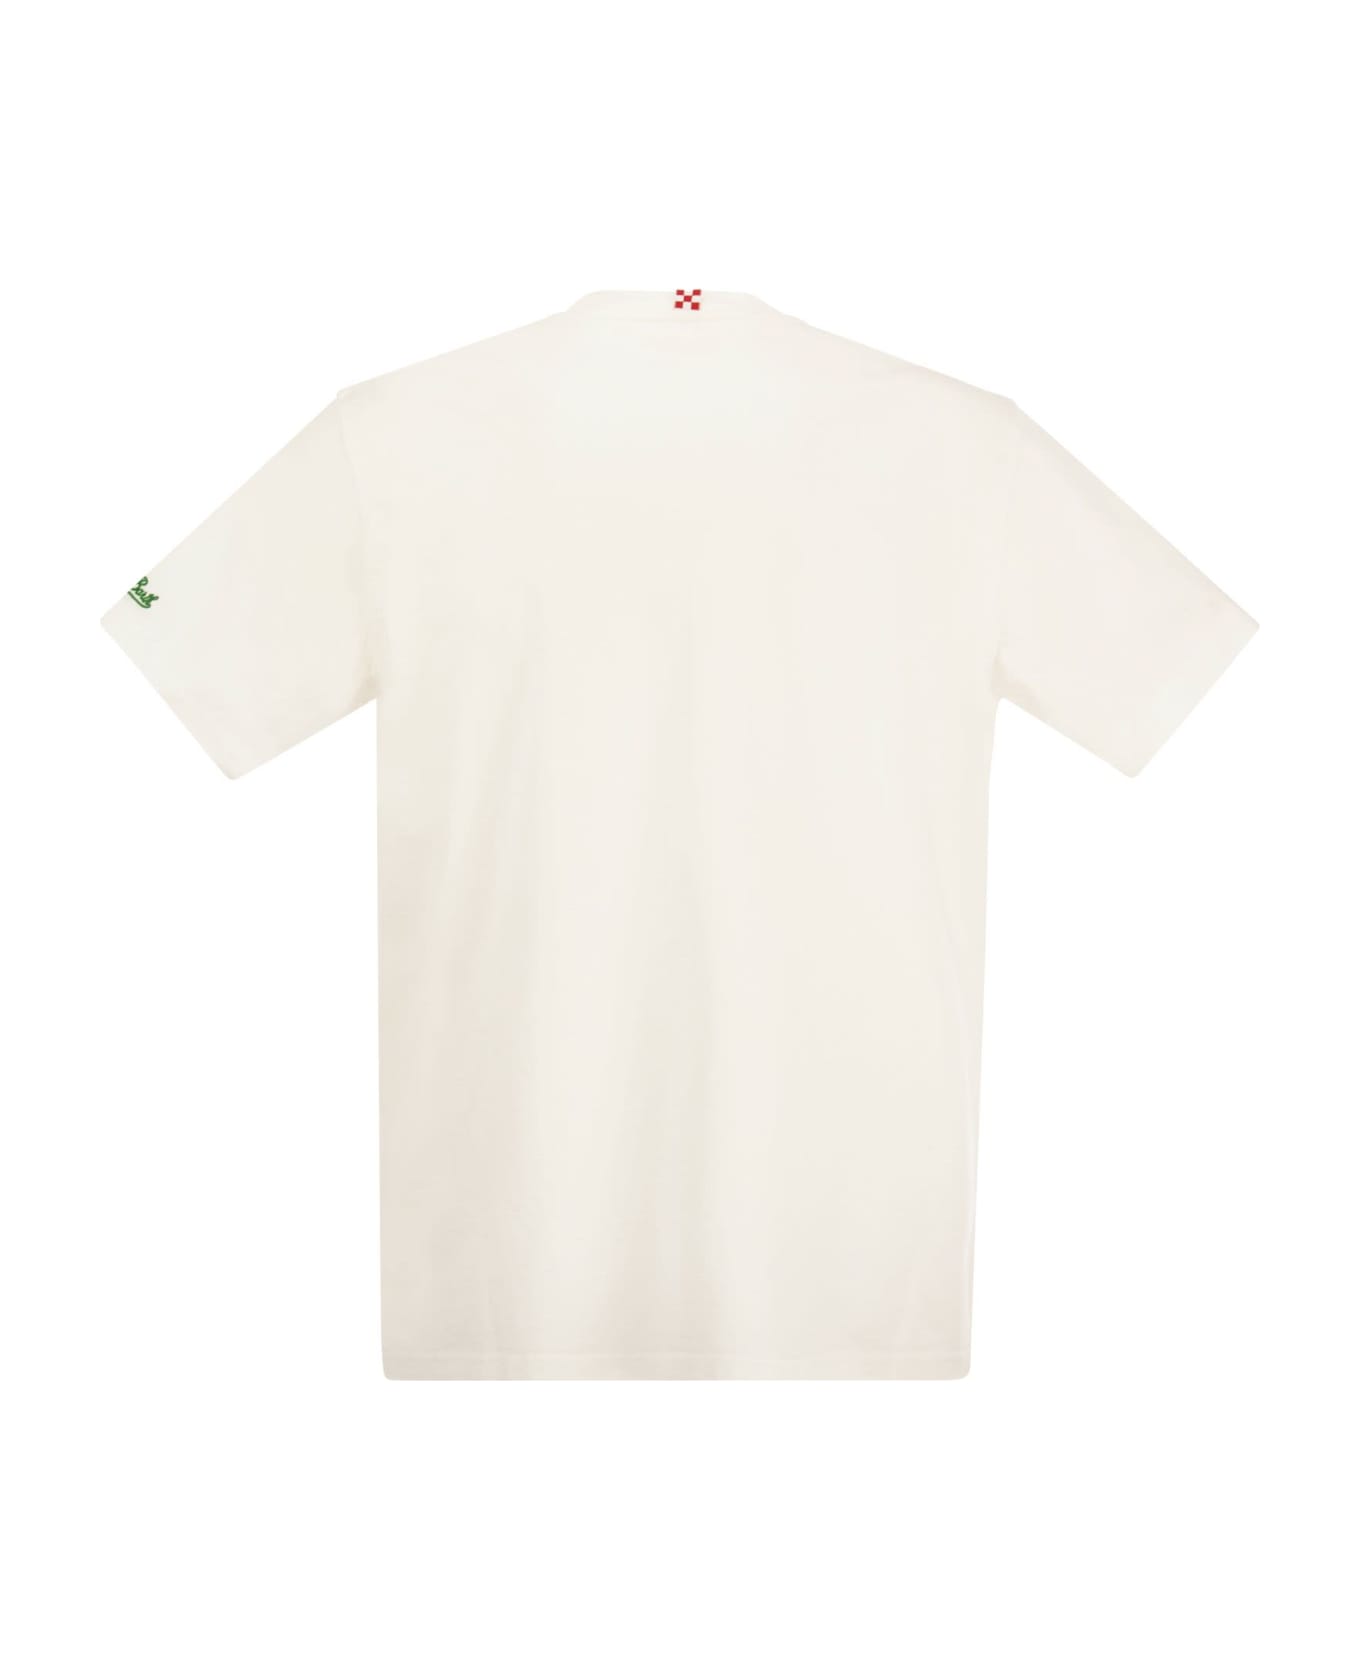 MC2 Saint Barth Tennis Team T-shirt With Embroidery On Pocket - White シャツ